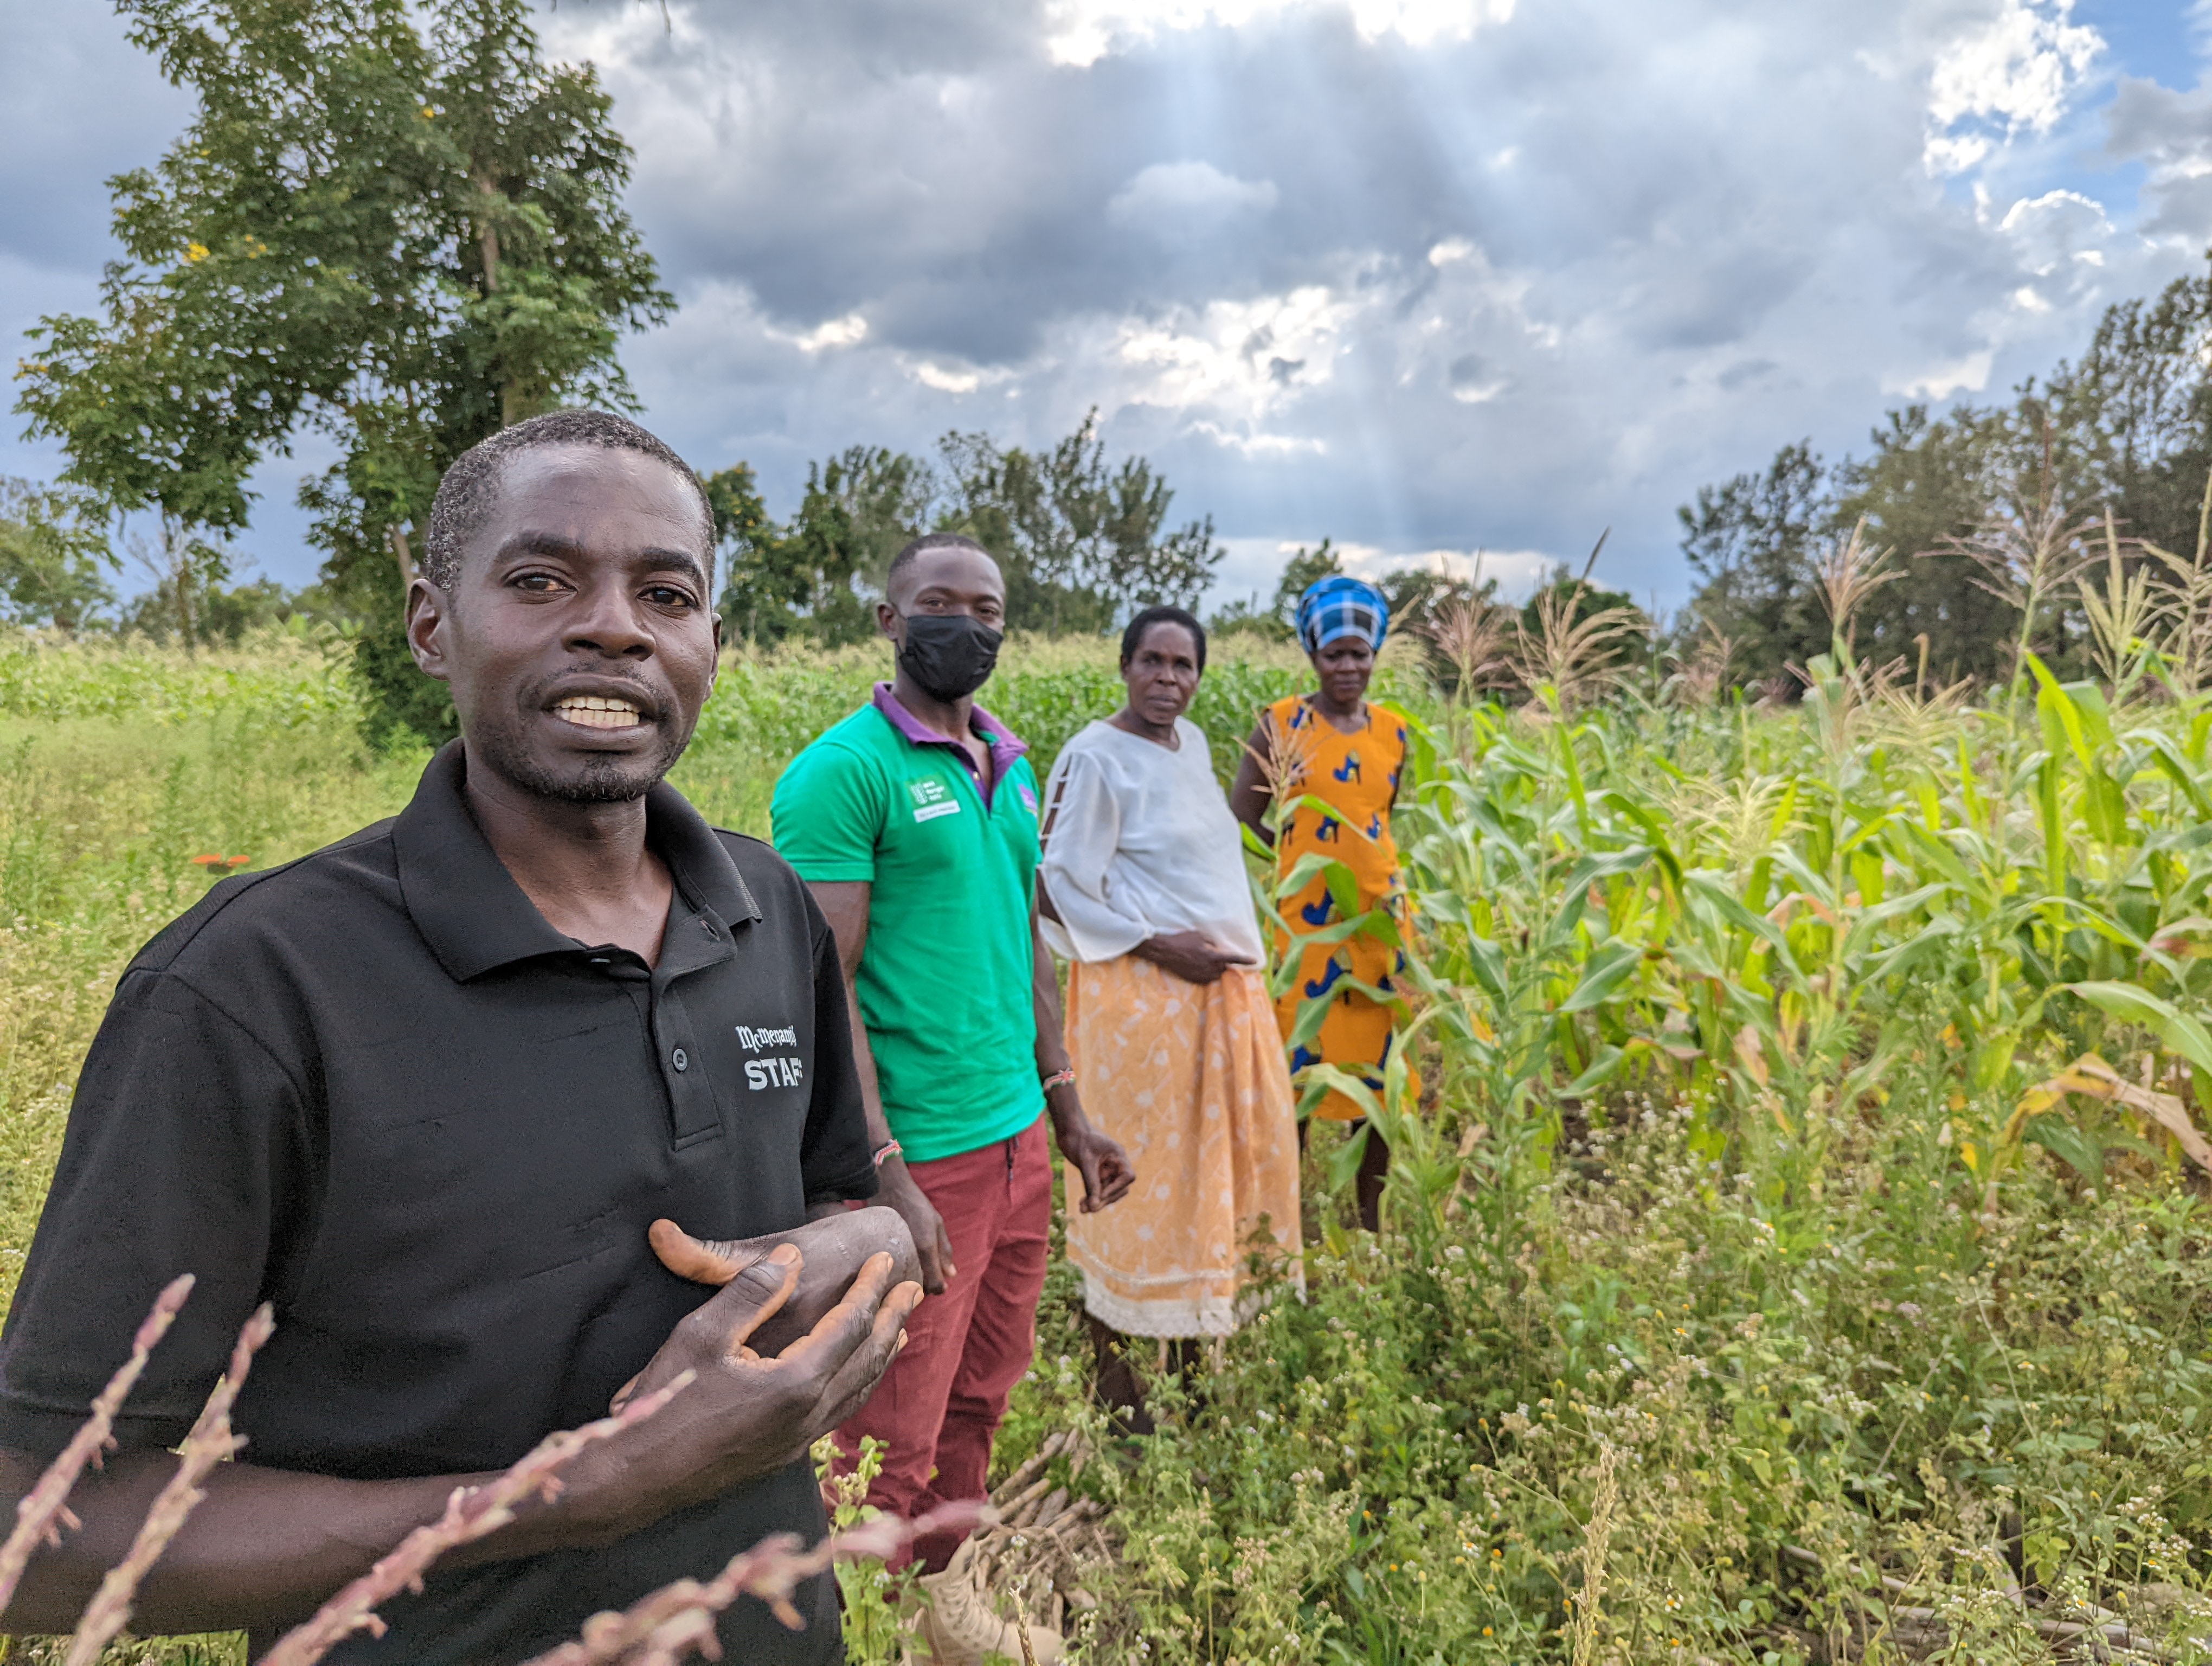 Farmers standing in the middle of a field. Photo: WFP/Claire Baker and Dorcas Kemboi